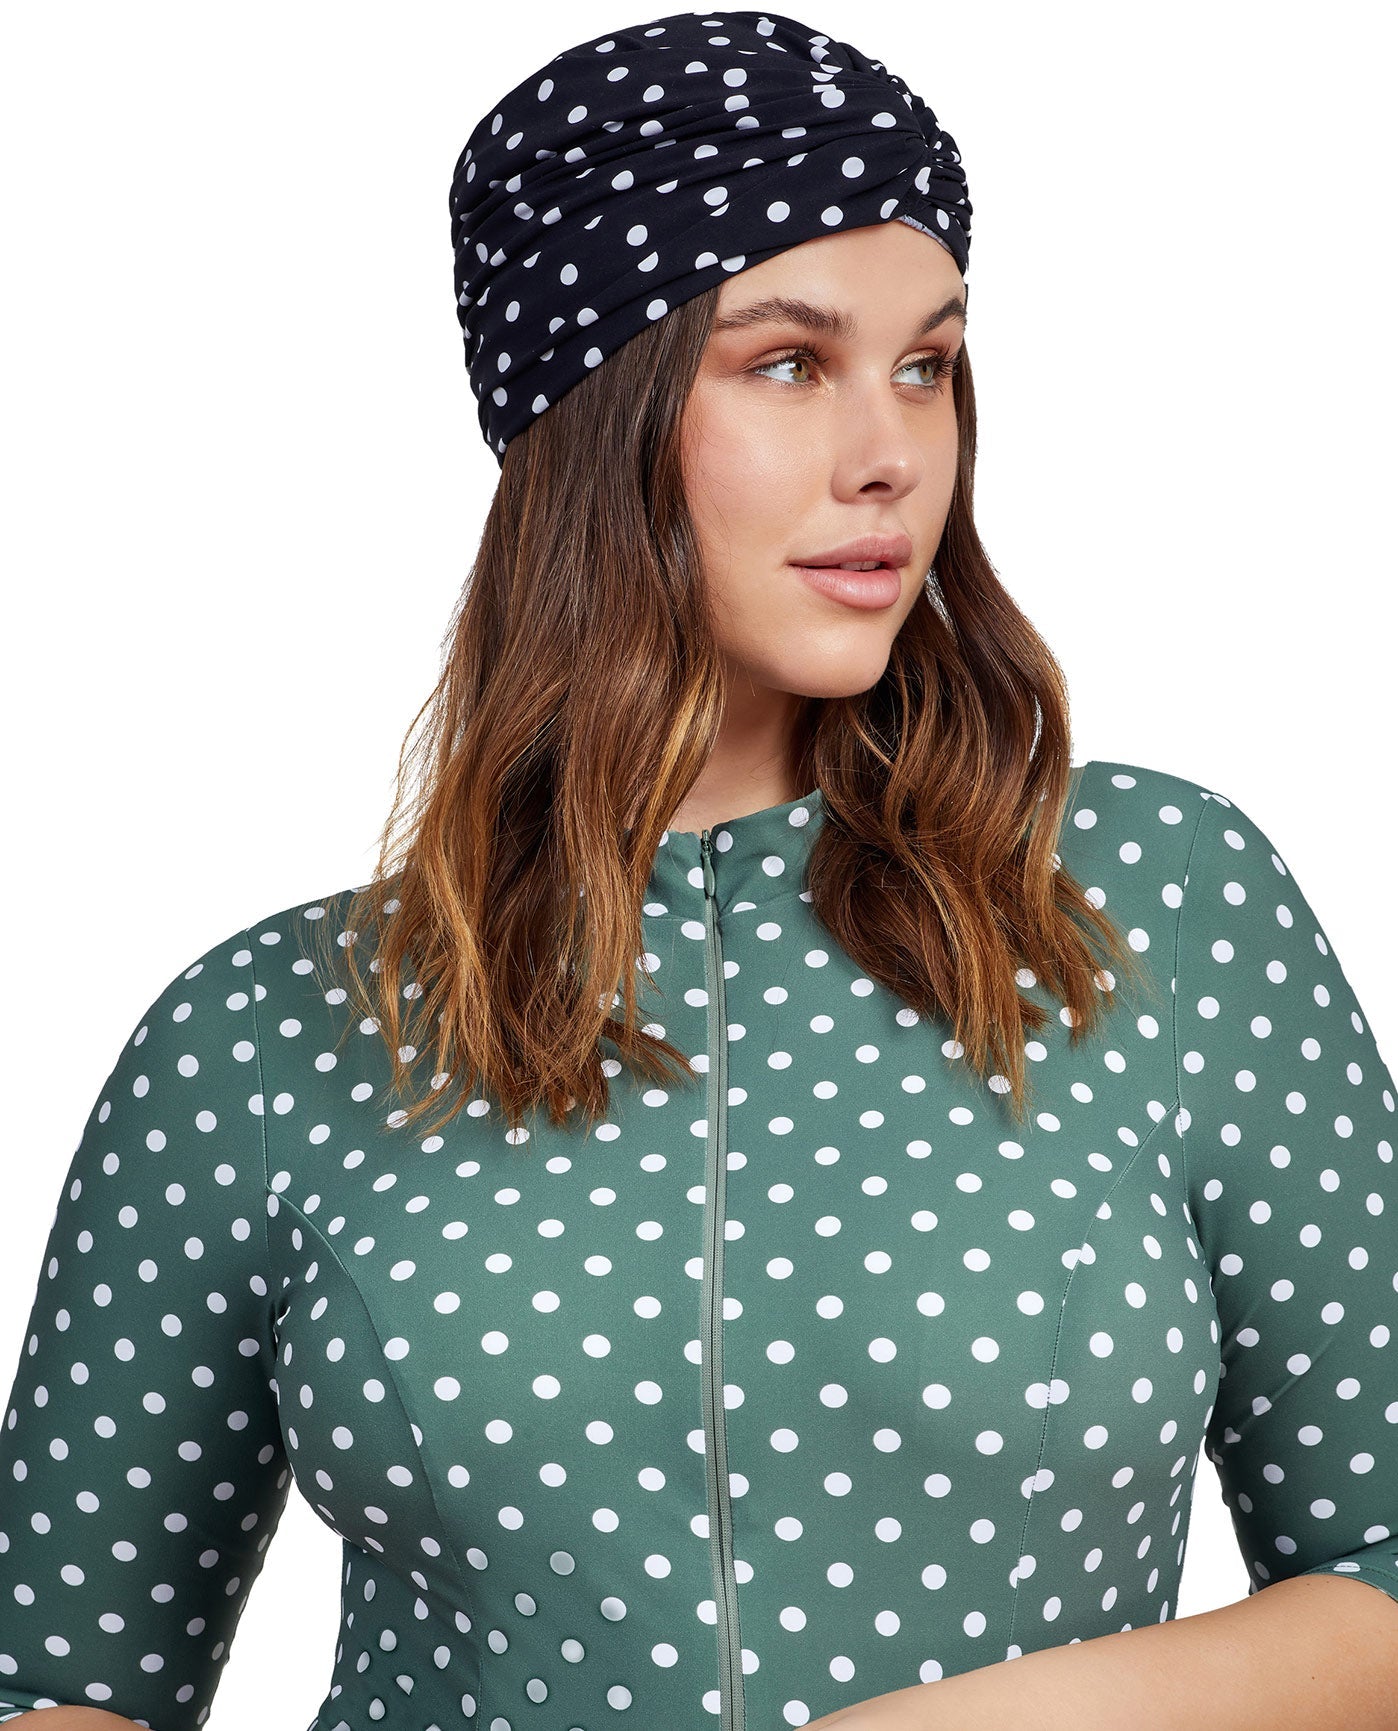 Front View Of Gottex Modest Knotted Hair Covering | GOTTEX MODEST BLACK AND WHITE DOTS